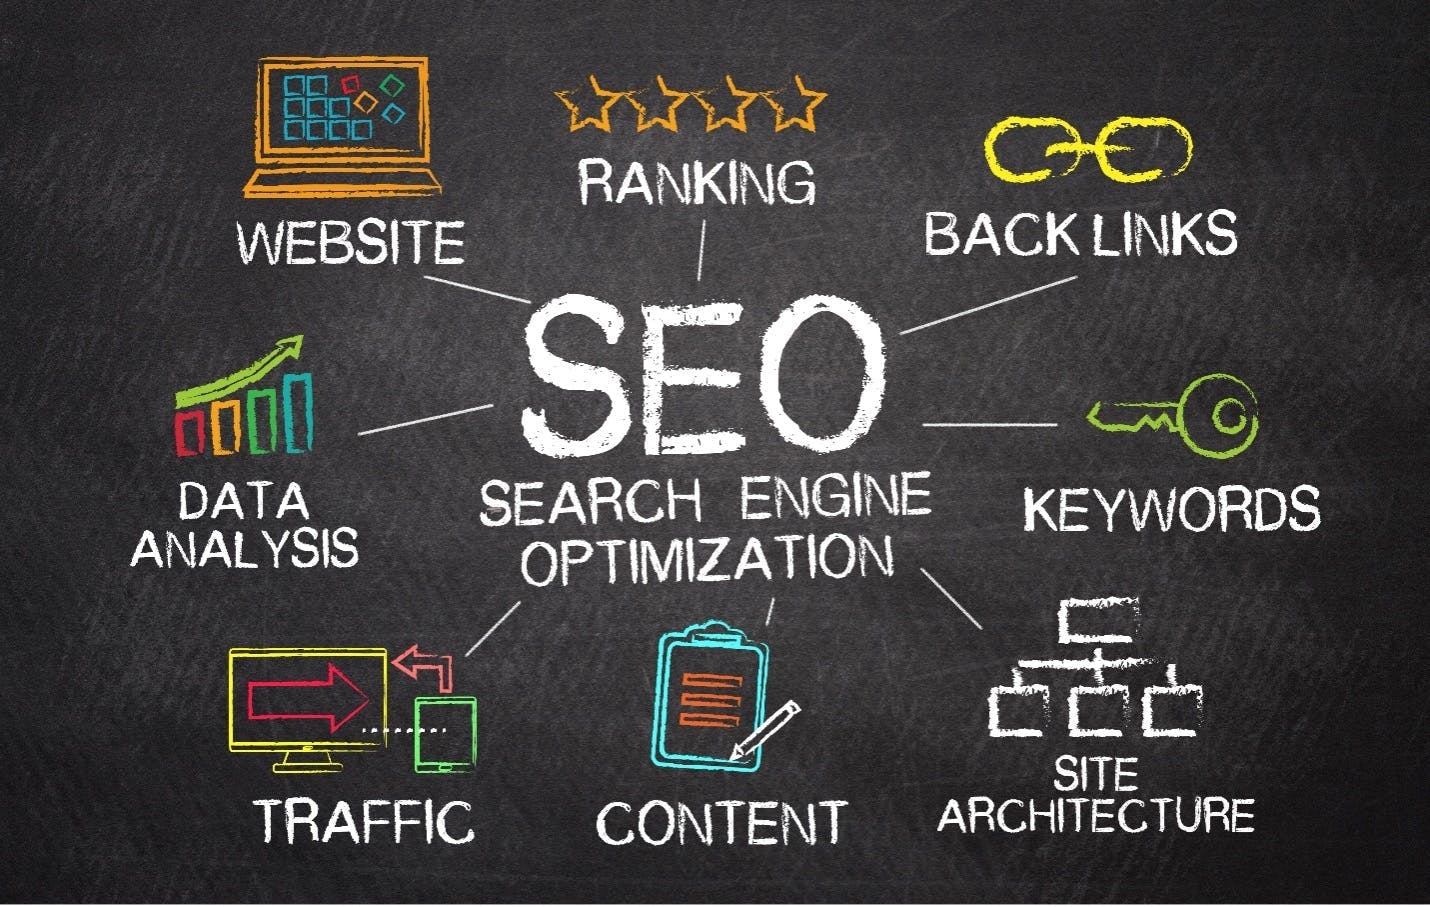 Search engine optimization infographic.